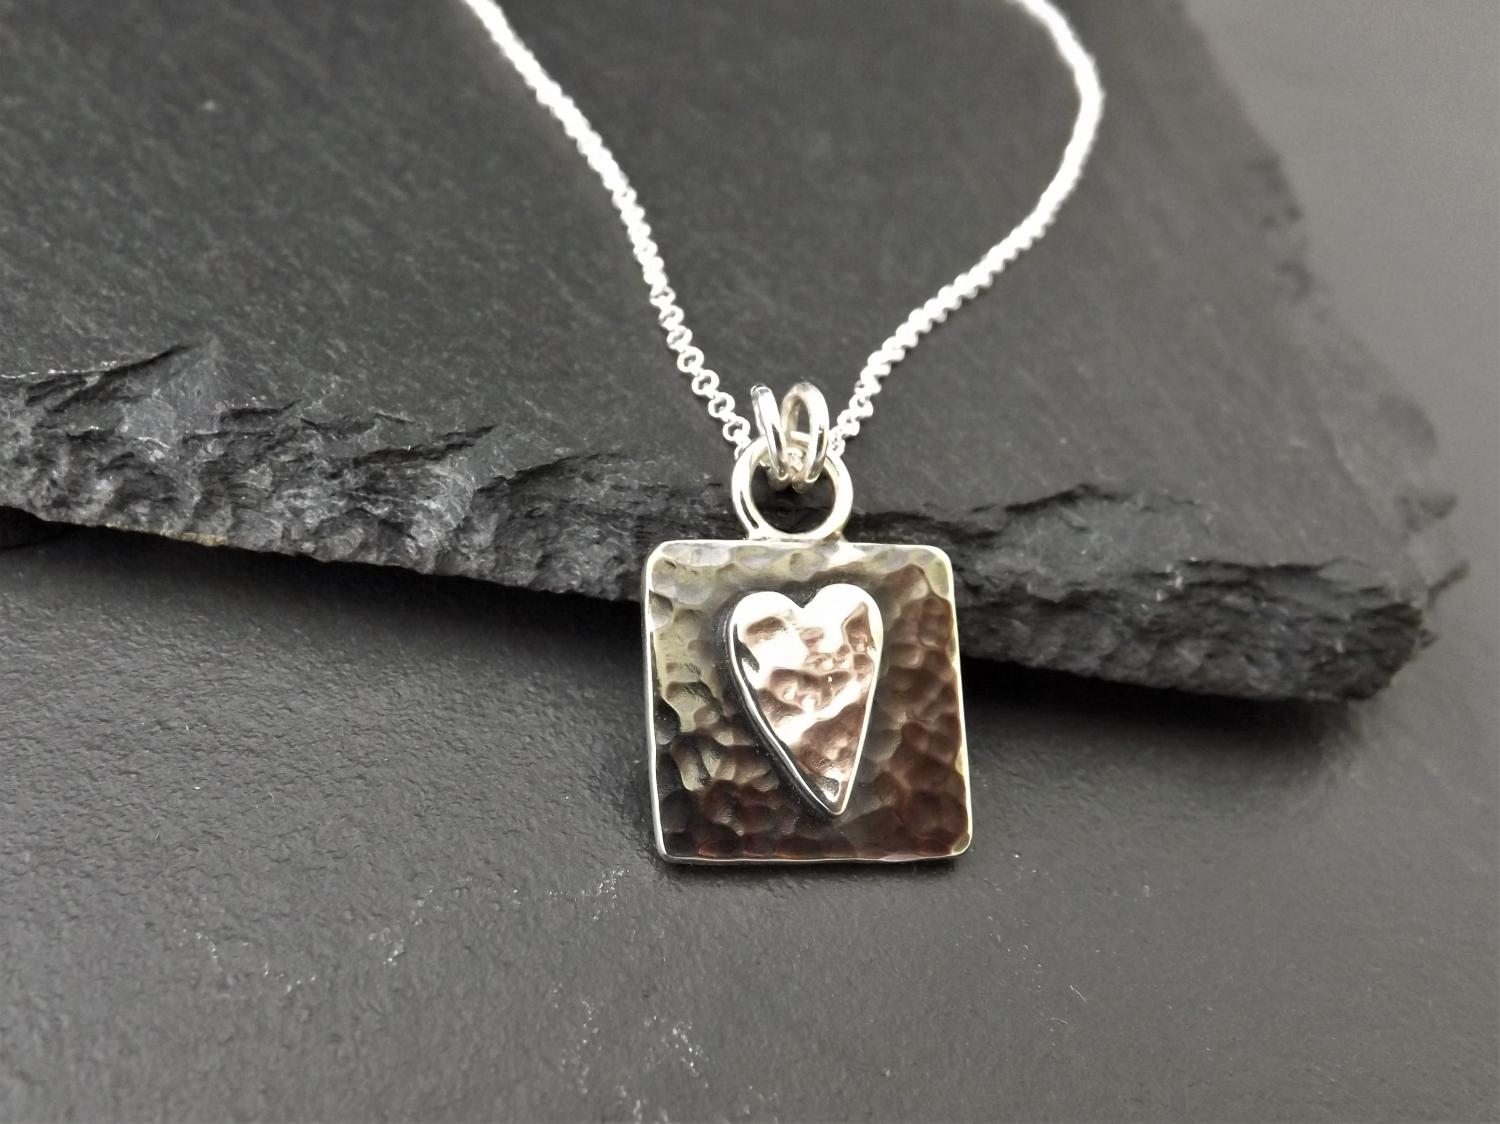 Hammered Heart on Square Silver Pendant Necklace